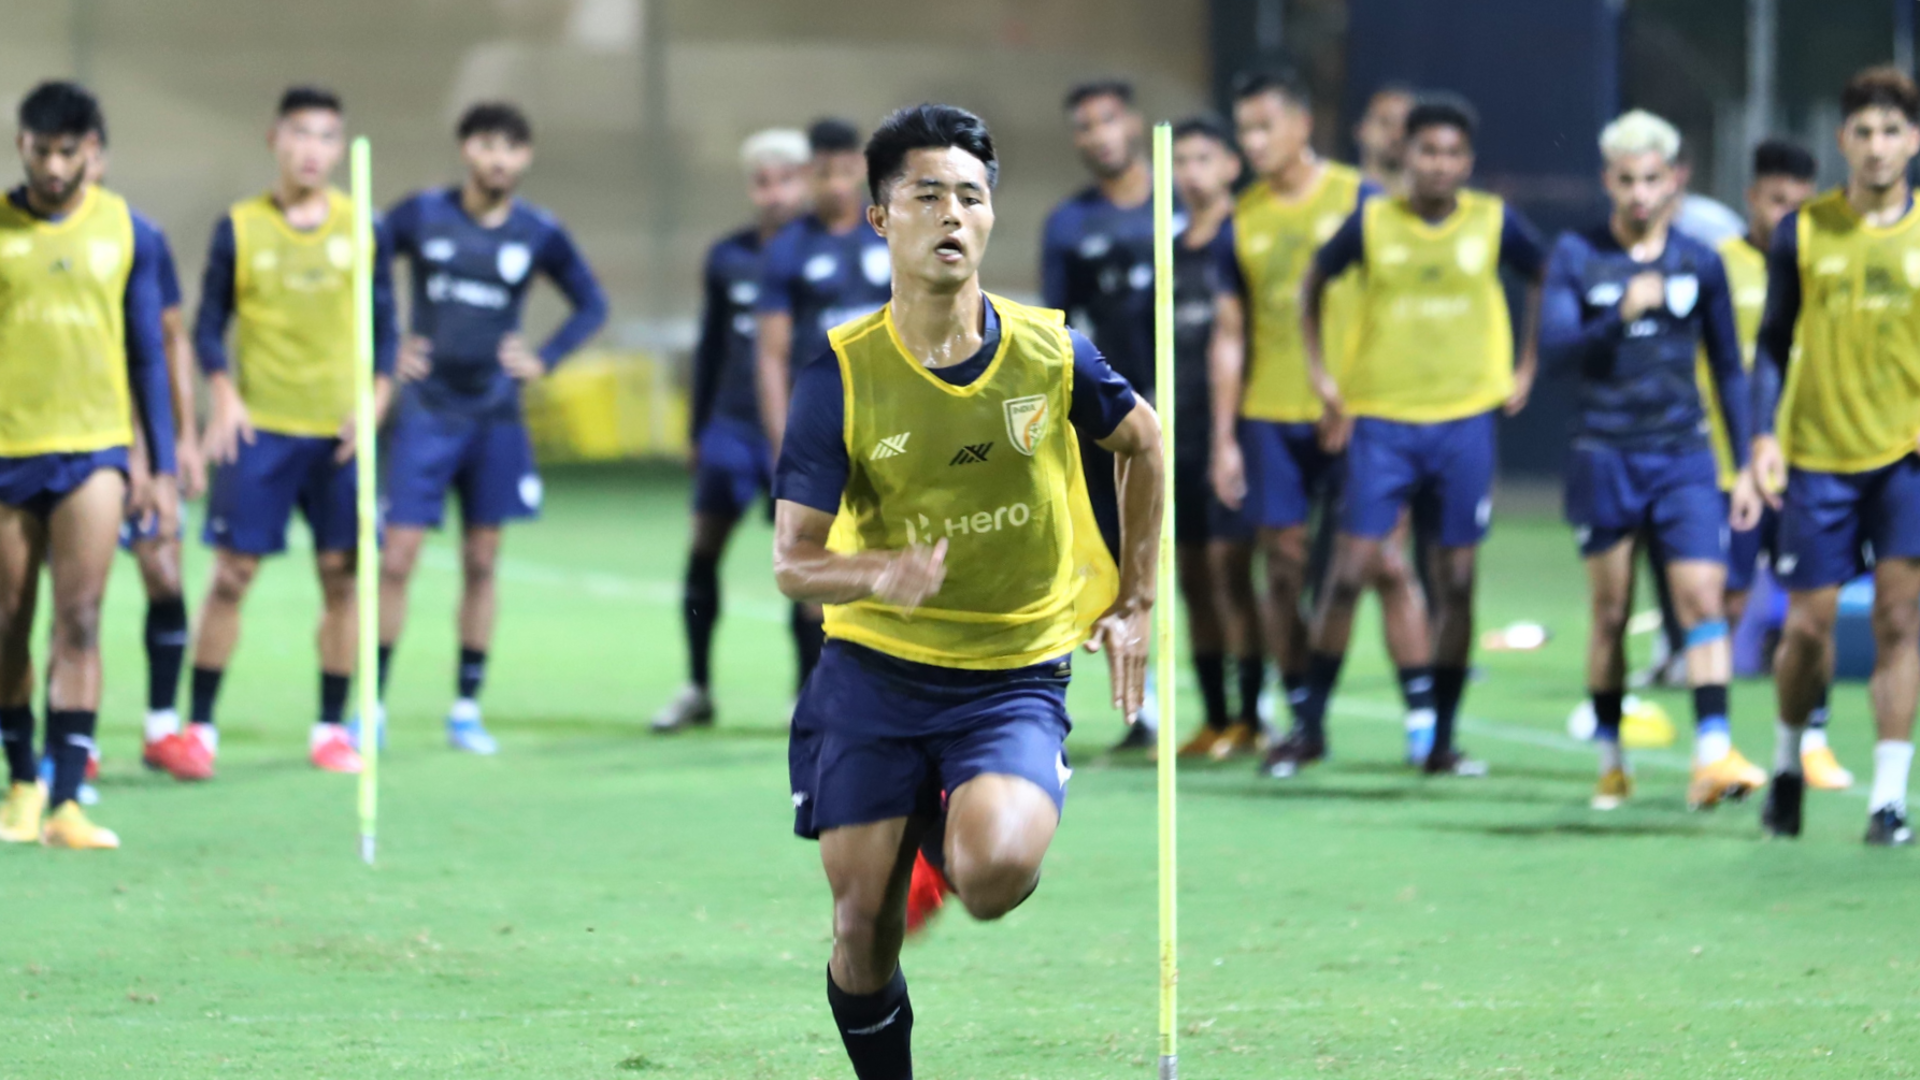 2022 AFC U-23 Asian Cup qualification: India boss Igor Stimac hoping to surprise opponents